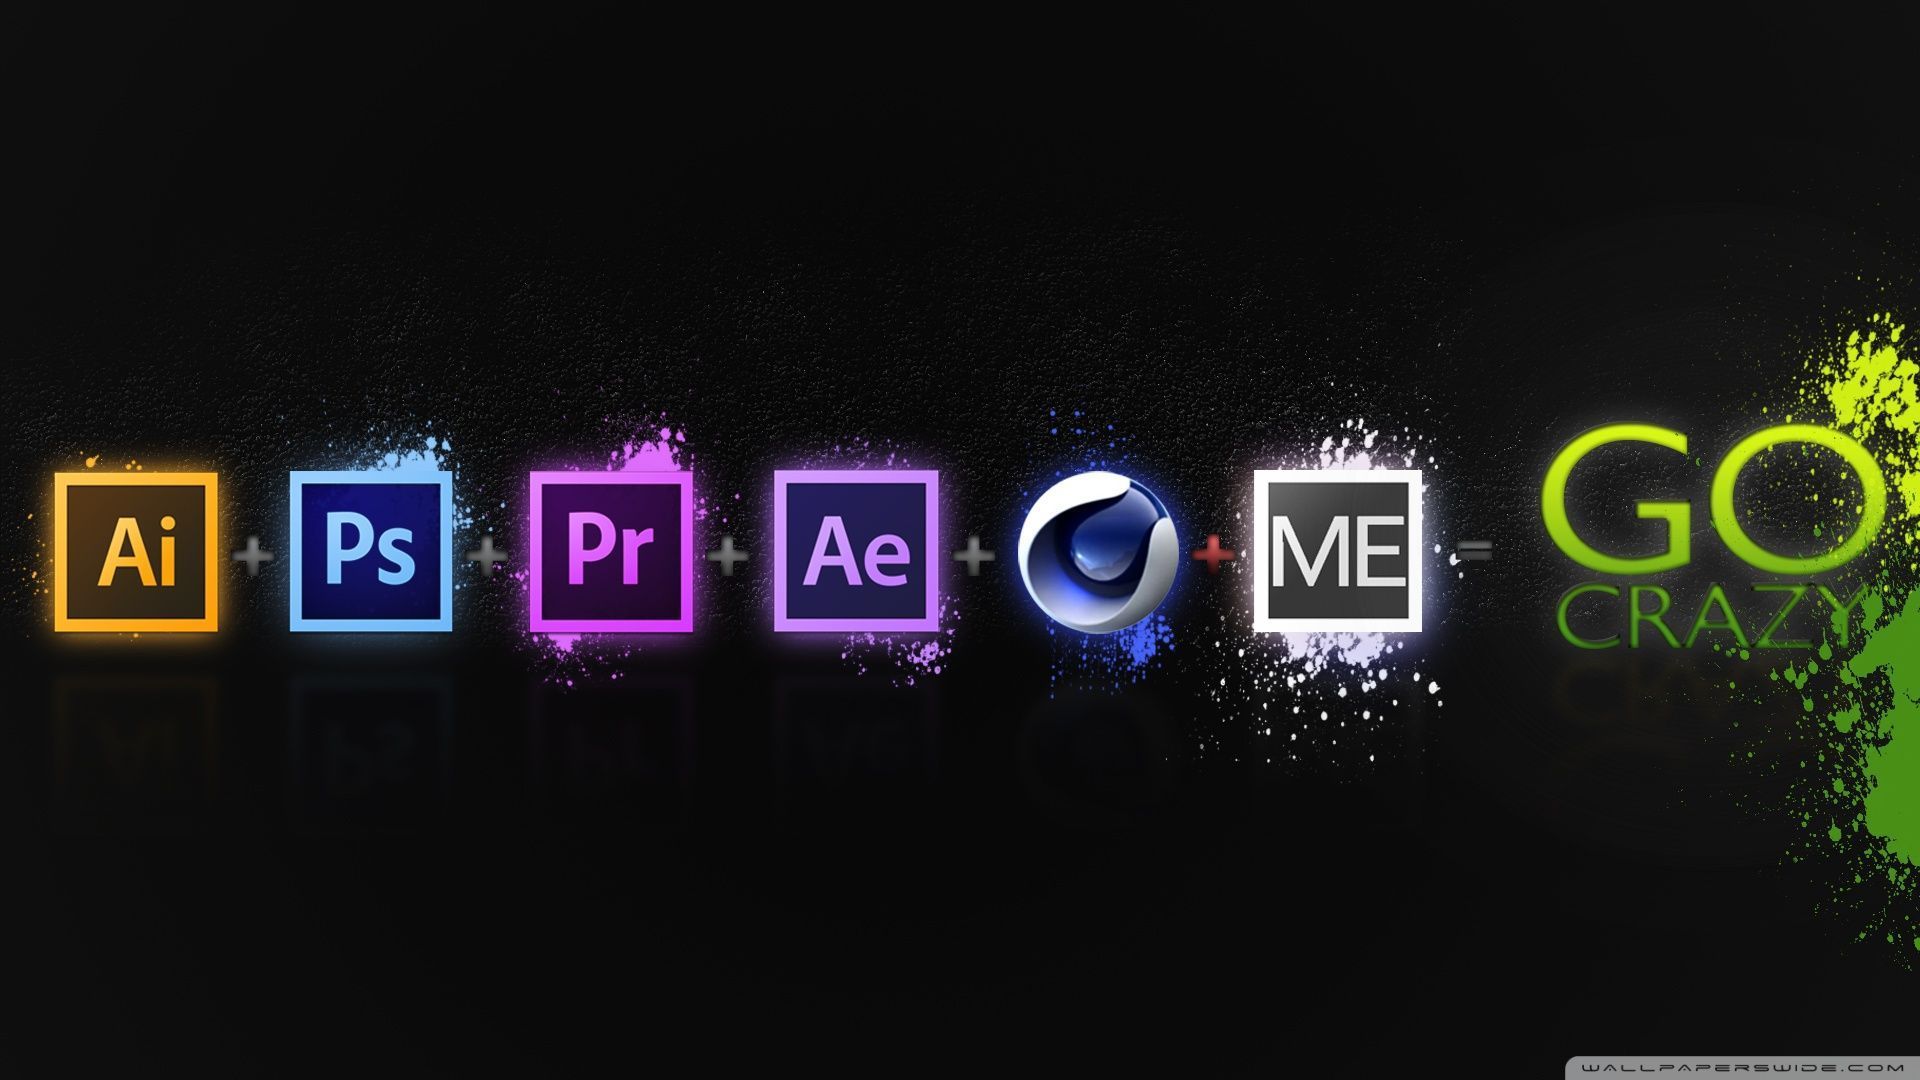 Adobe After Effects Wallpaper Free Adobe After Effects Background